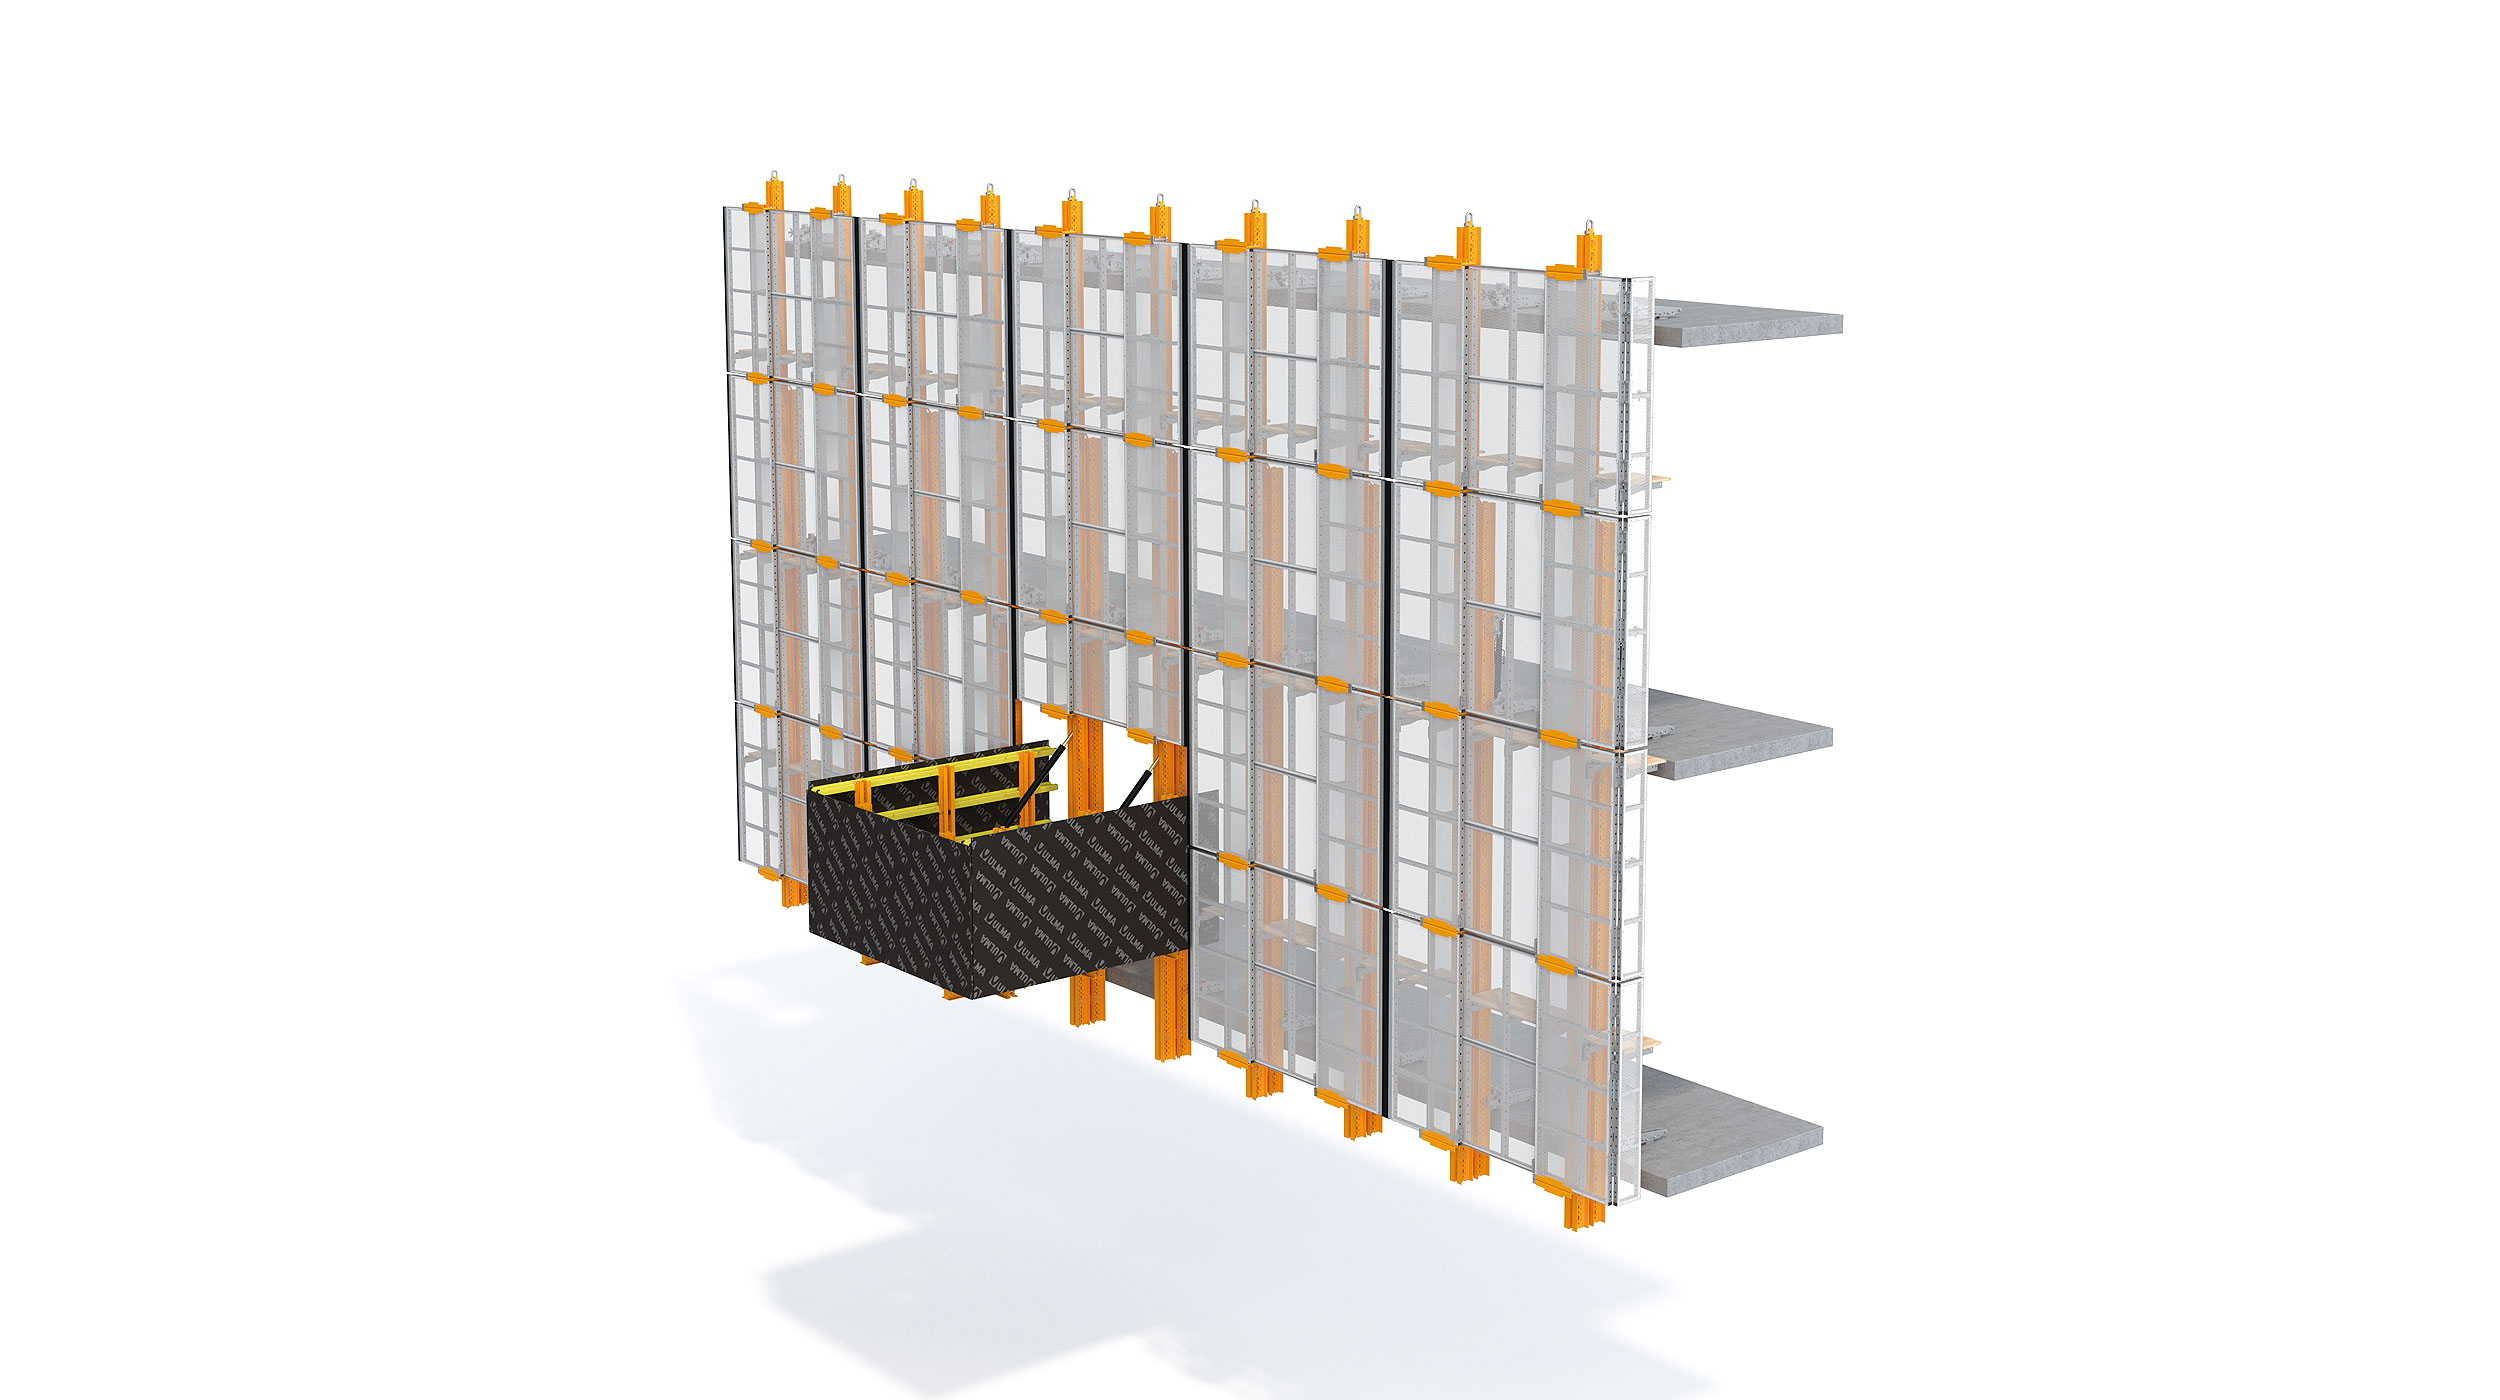 Extremely flexible perimeter safety screen that adapts to any building geometry and configuration need. Designed for high-rise buildings, the system can be hydraulic or crane-lifted.